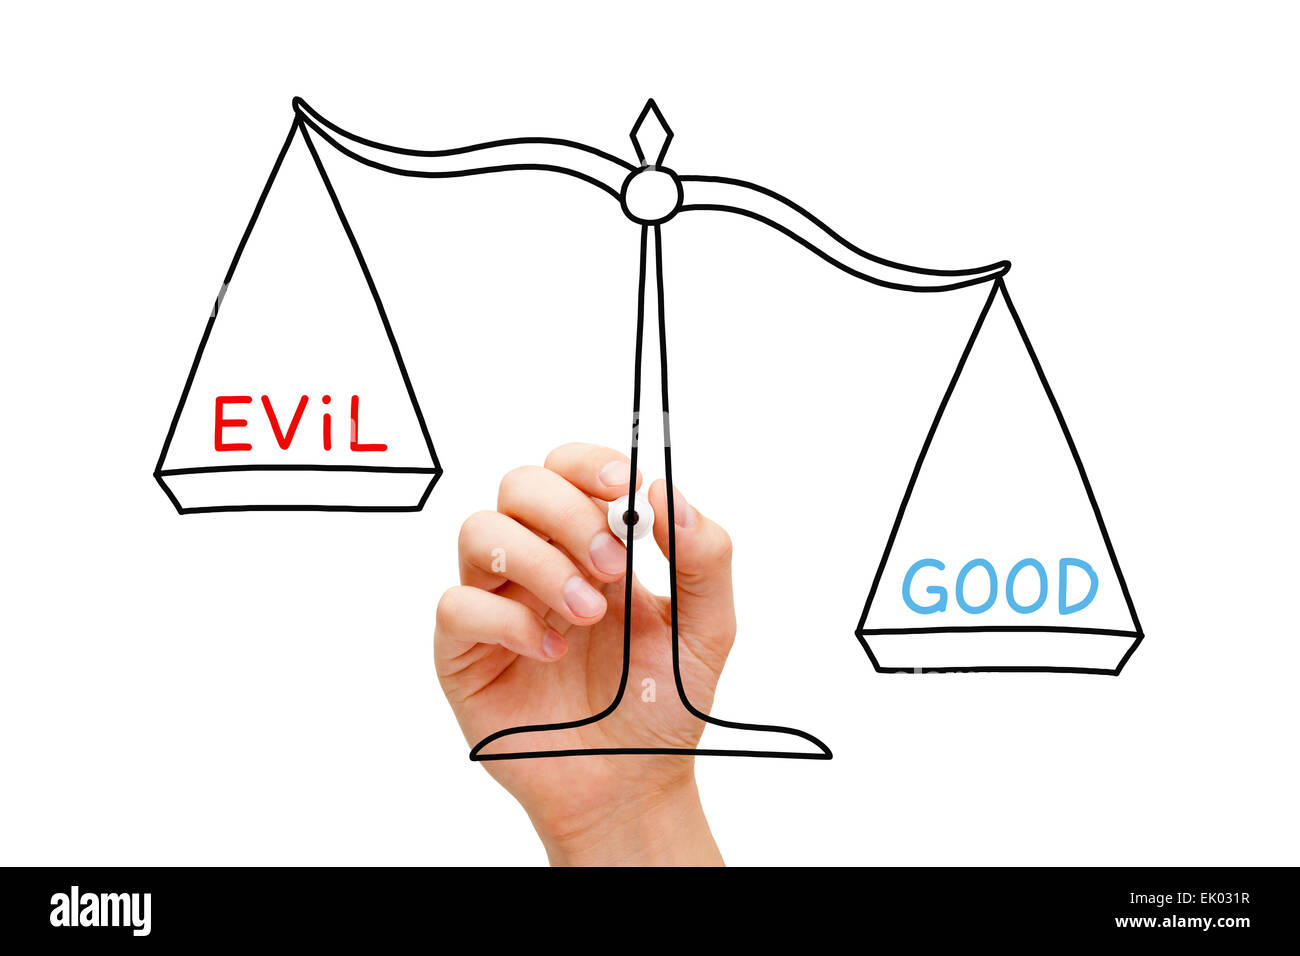 Hand drawing Good or Evil scale concept with marker on transparent wipe board isolated on white. Stock Photo